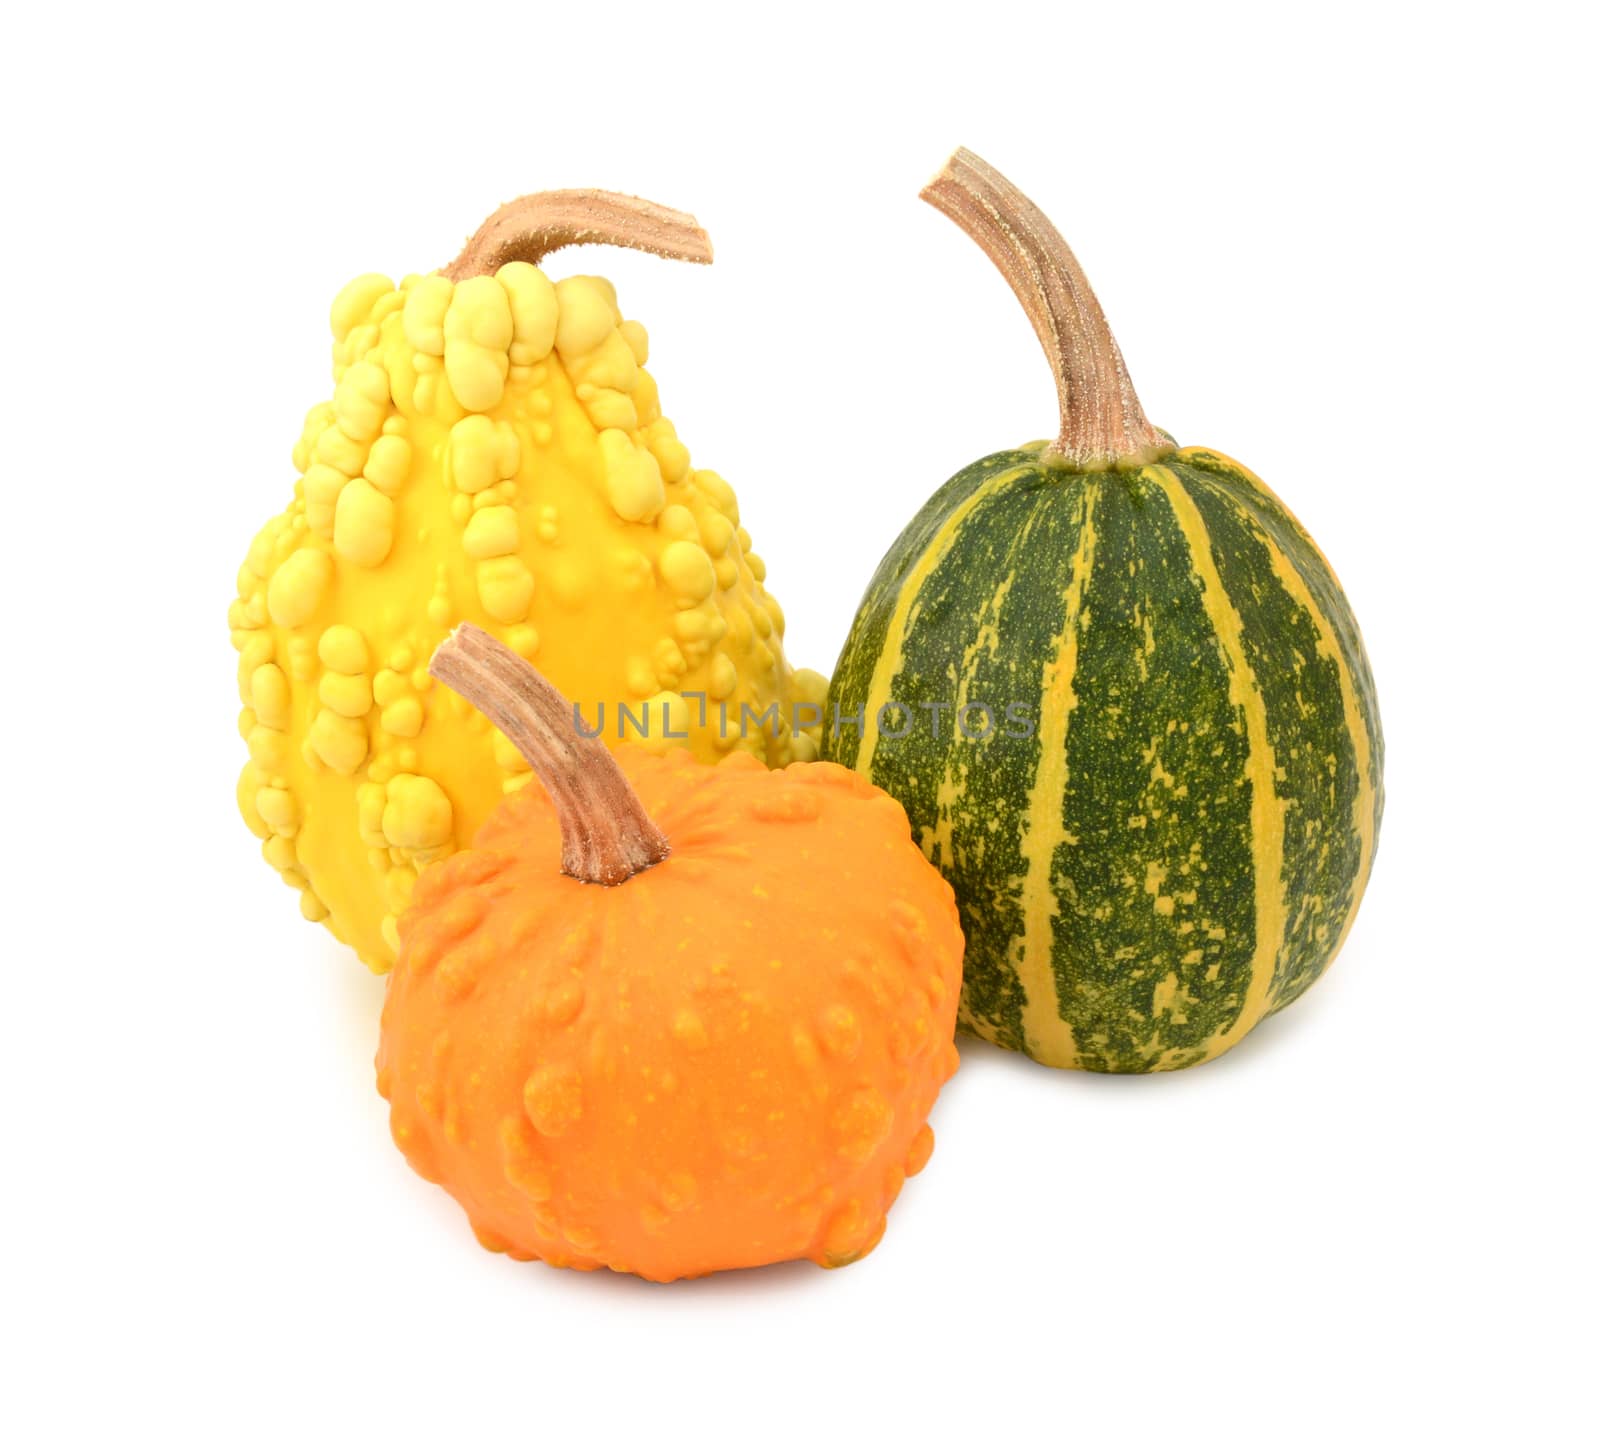 Three yellow, orange and striped green ornamental gourds by sarahdoow